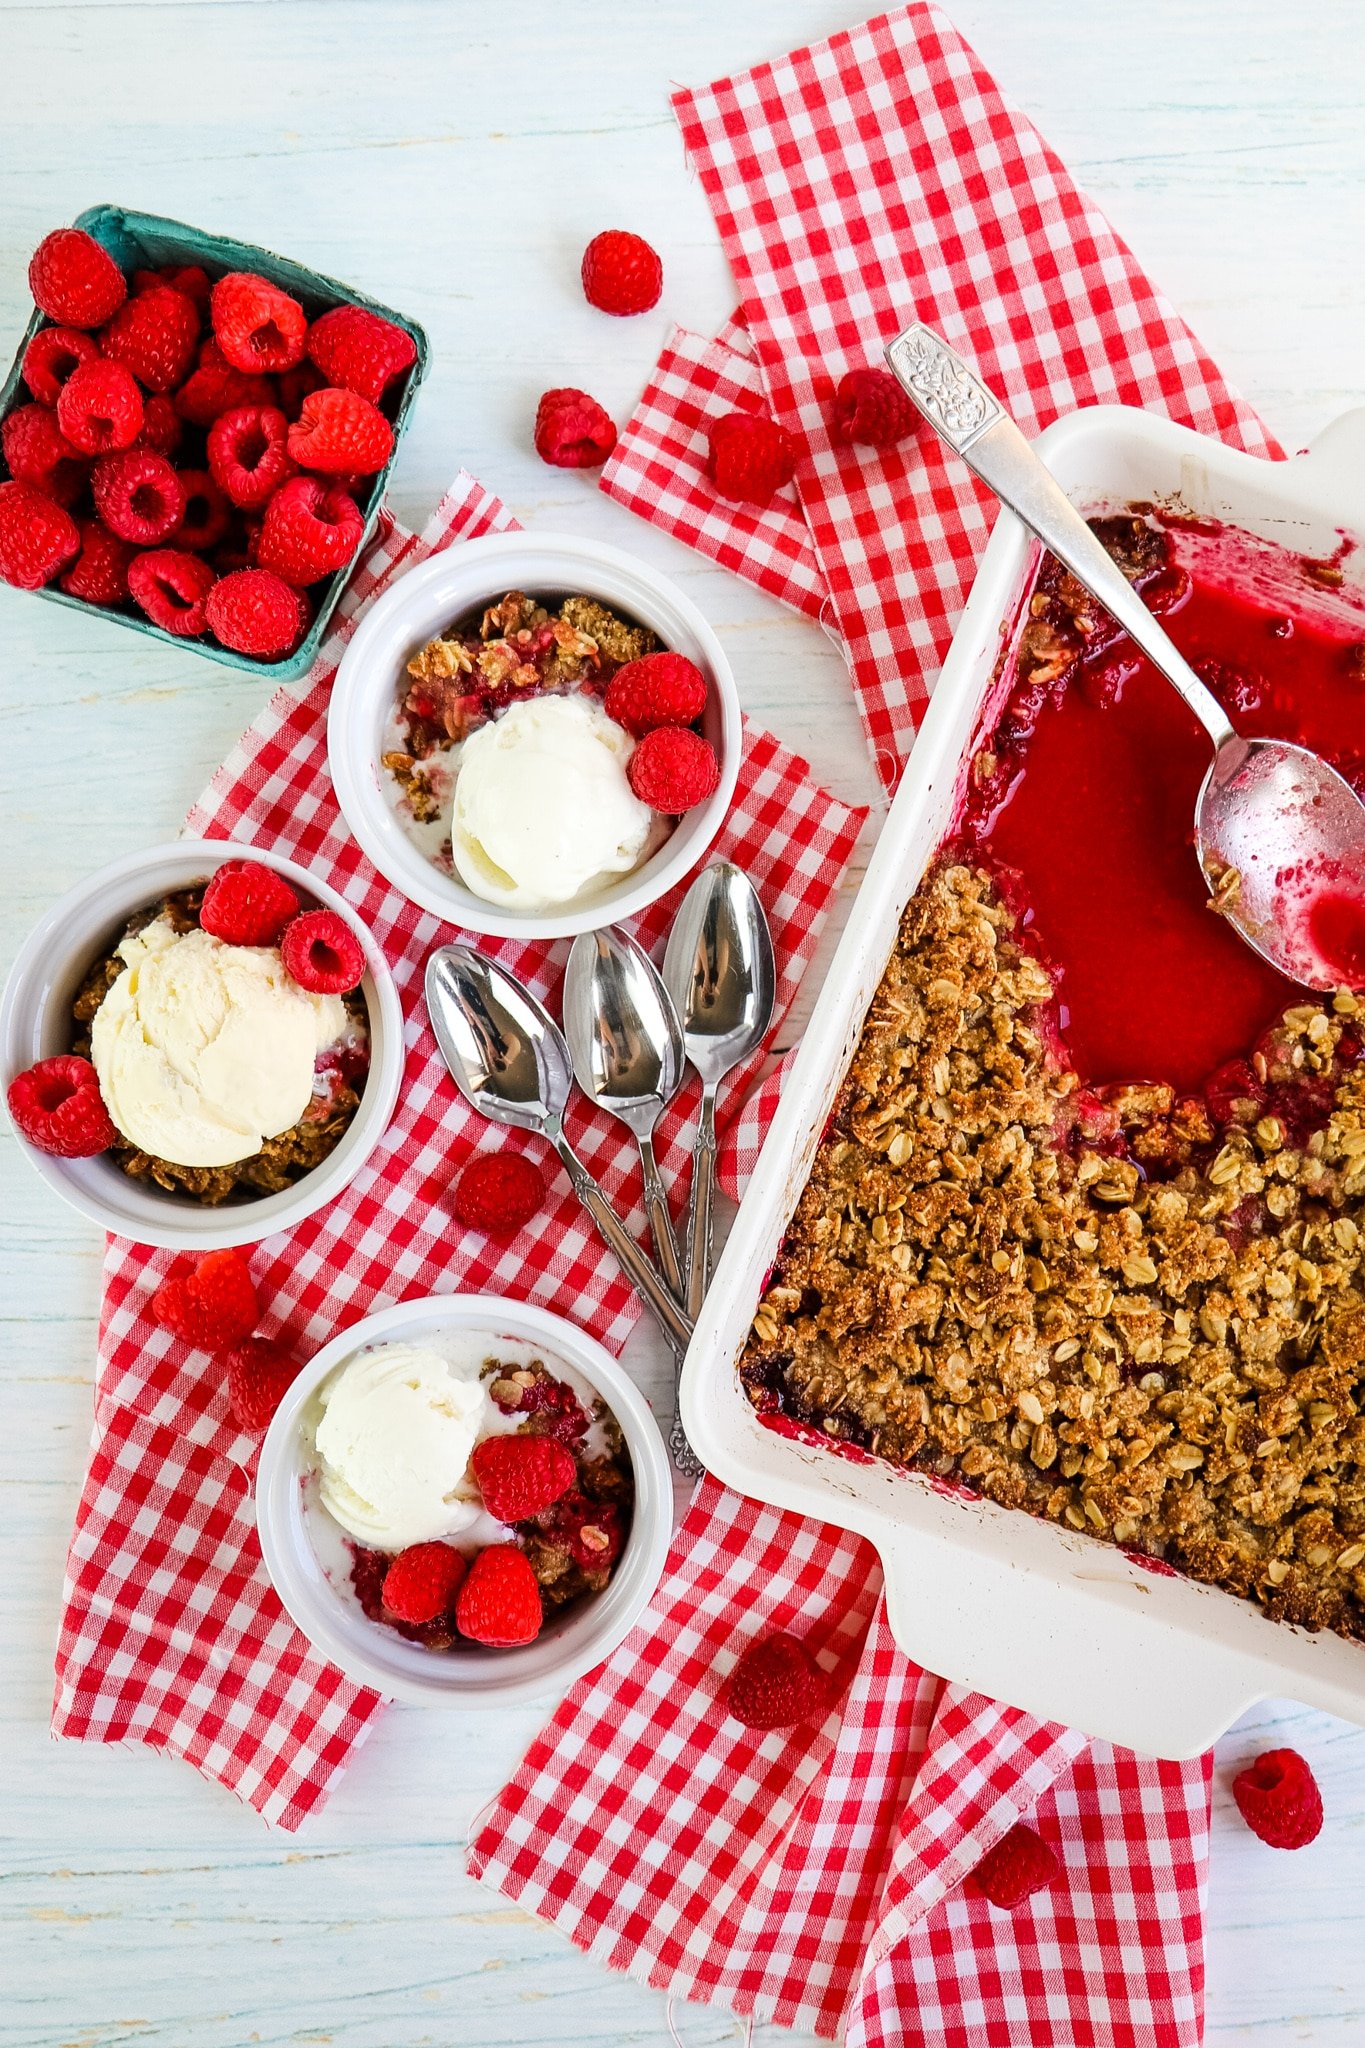 Raspberry crumble in baking dish and spooned into three bowls with ice cream.